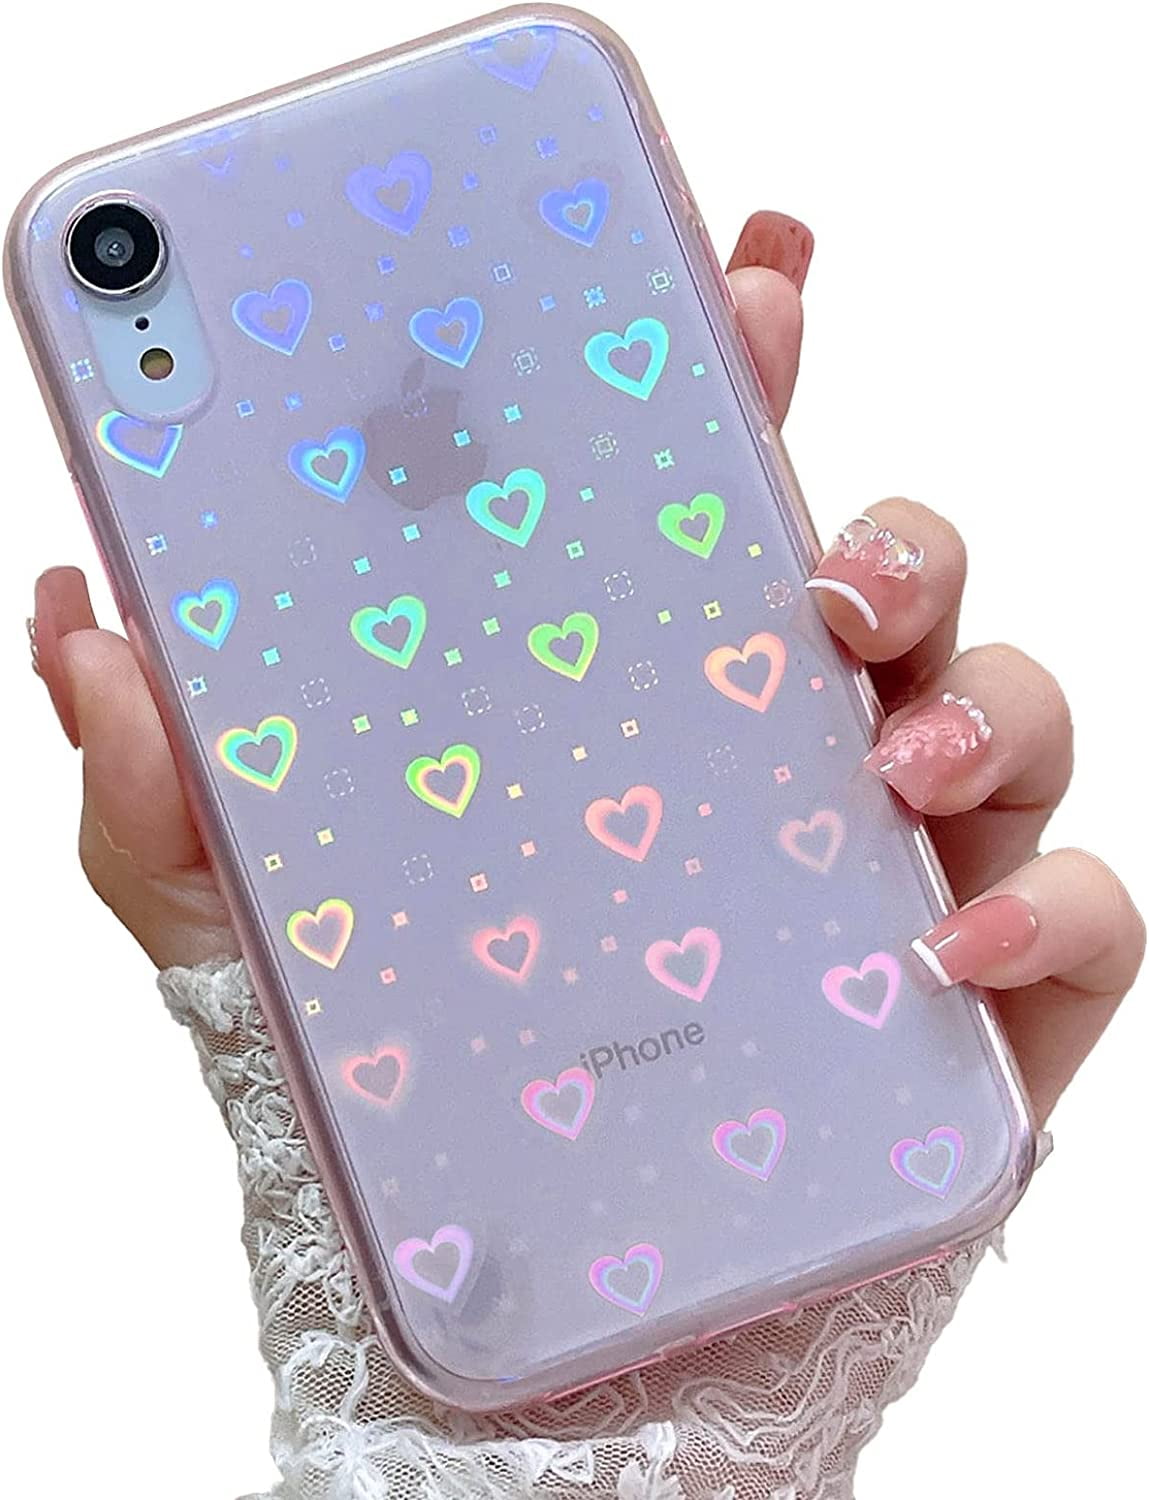 Hzcwxqh Cute Glitter Clear Laser Love Hearts Phone Case Compatible with iPhone SE 2020, iPhone 8, iPhone 7, Slim Thin Soft Shockproof Cover for